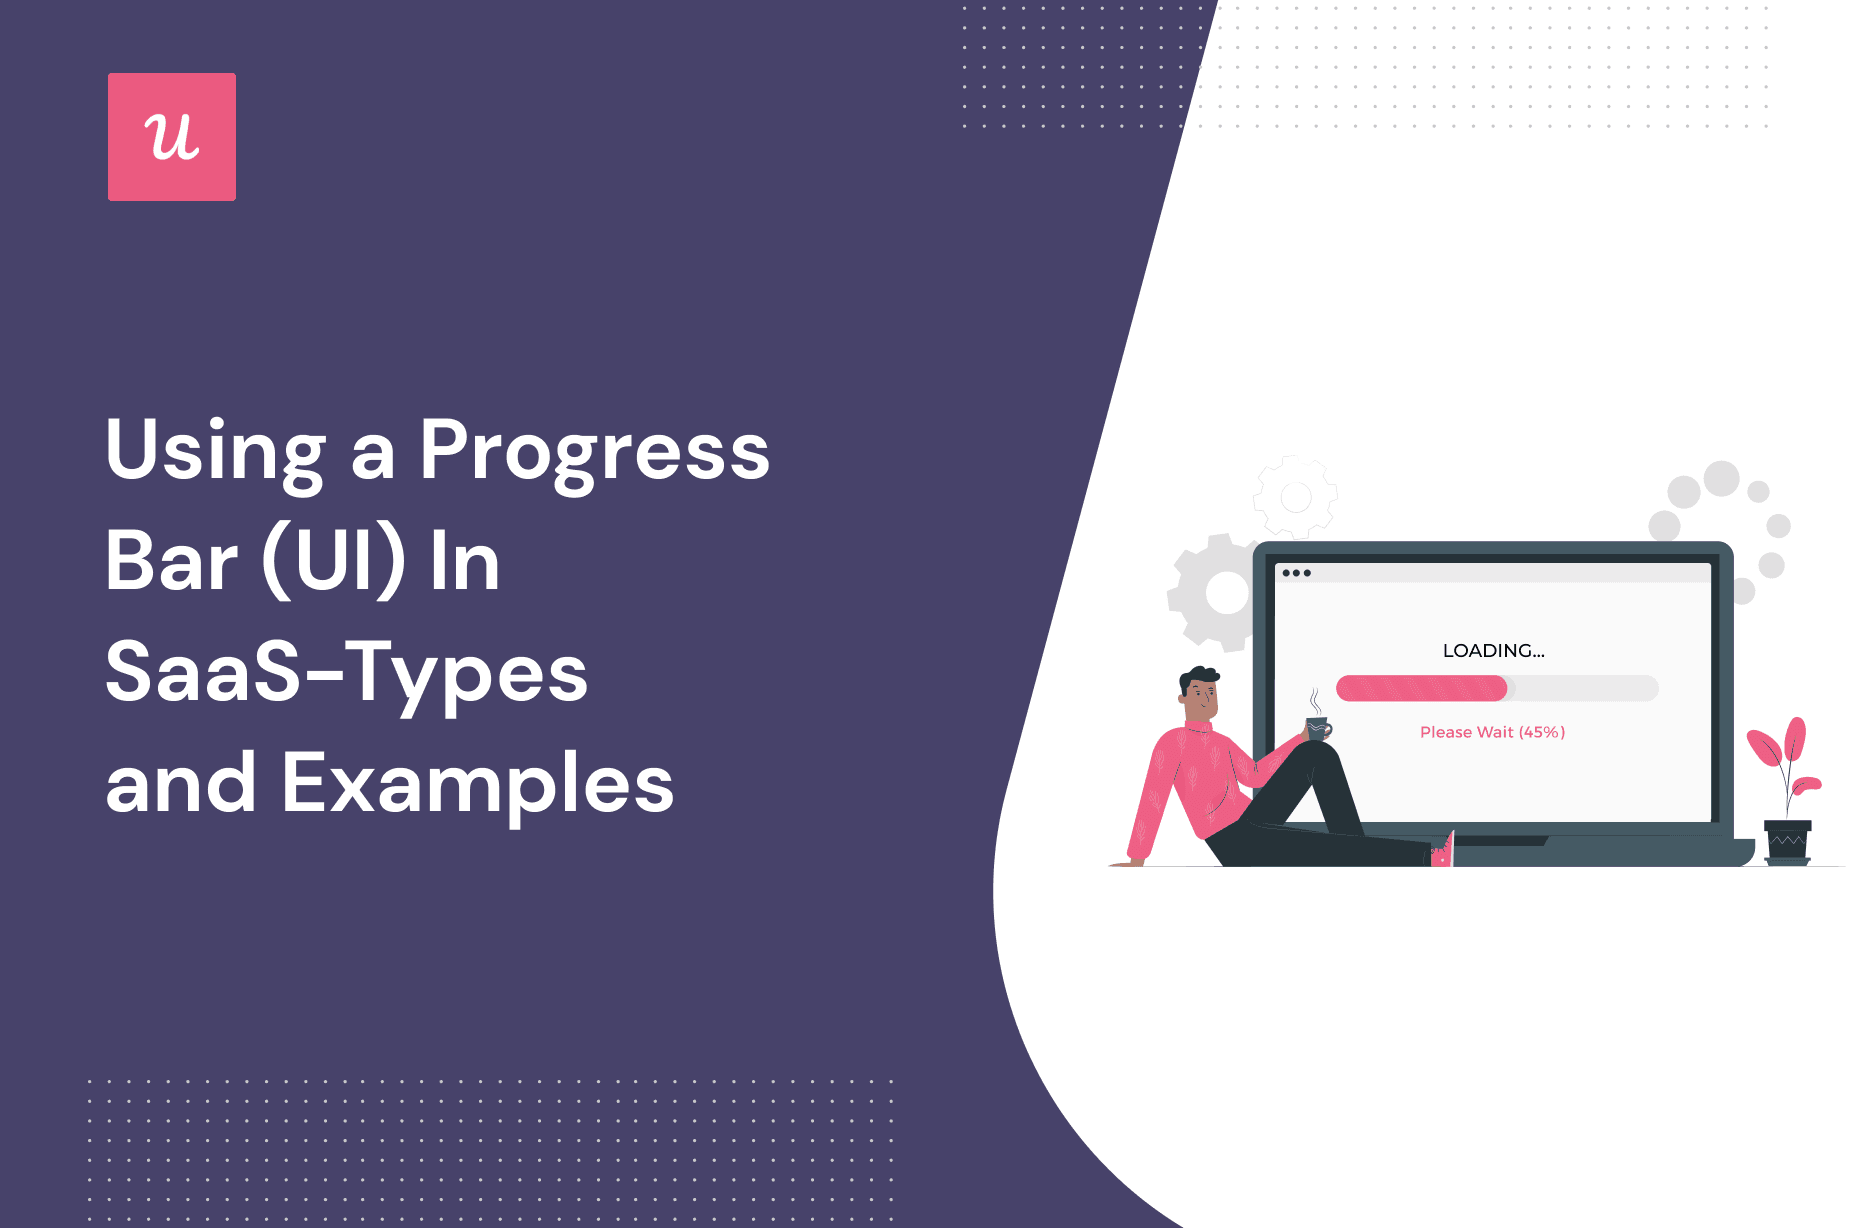 Using a Progress Bar (UI) in SaaS-Types and Examples